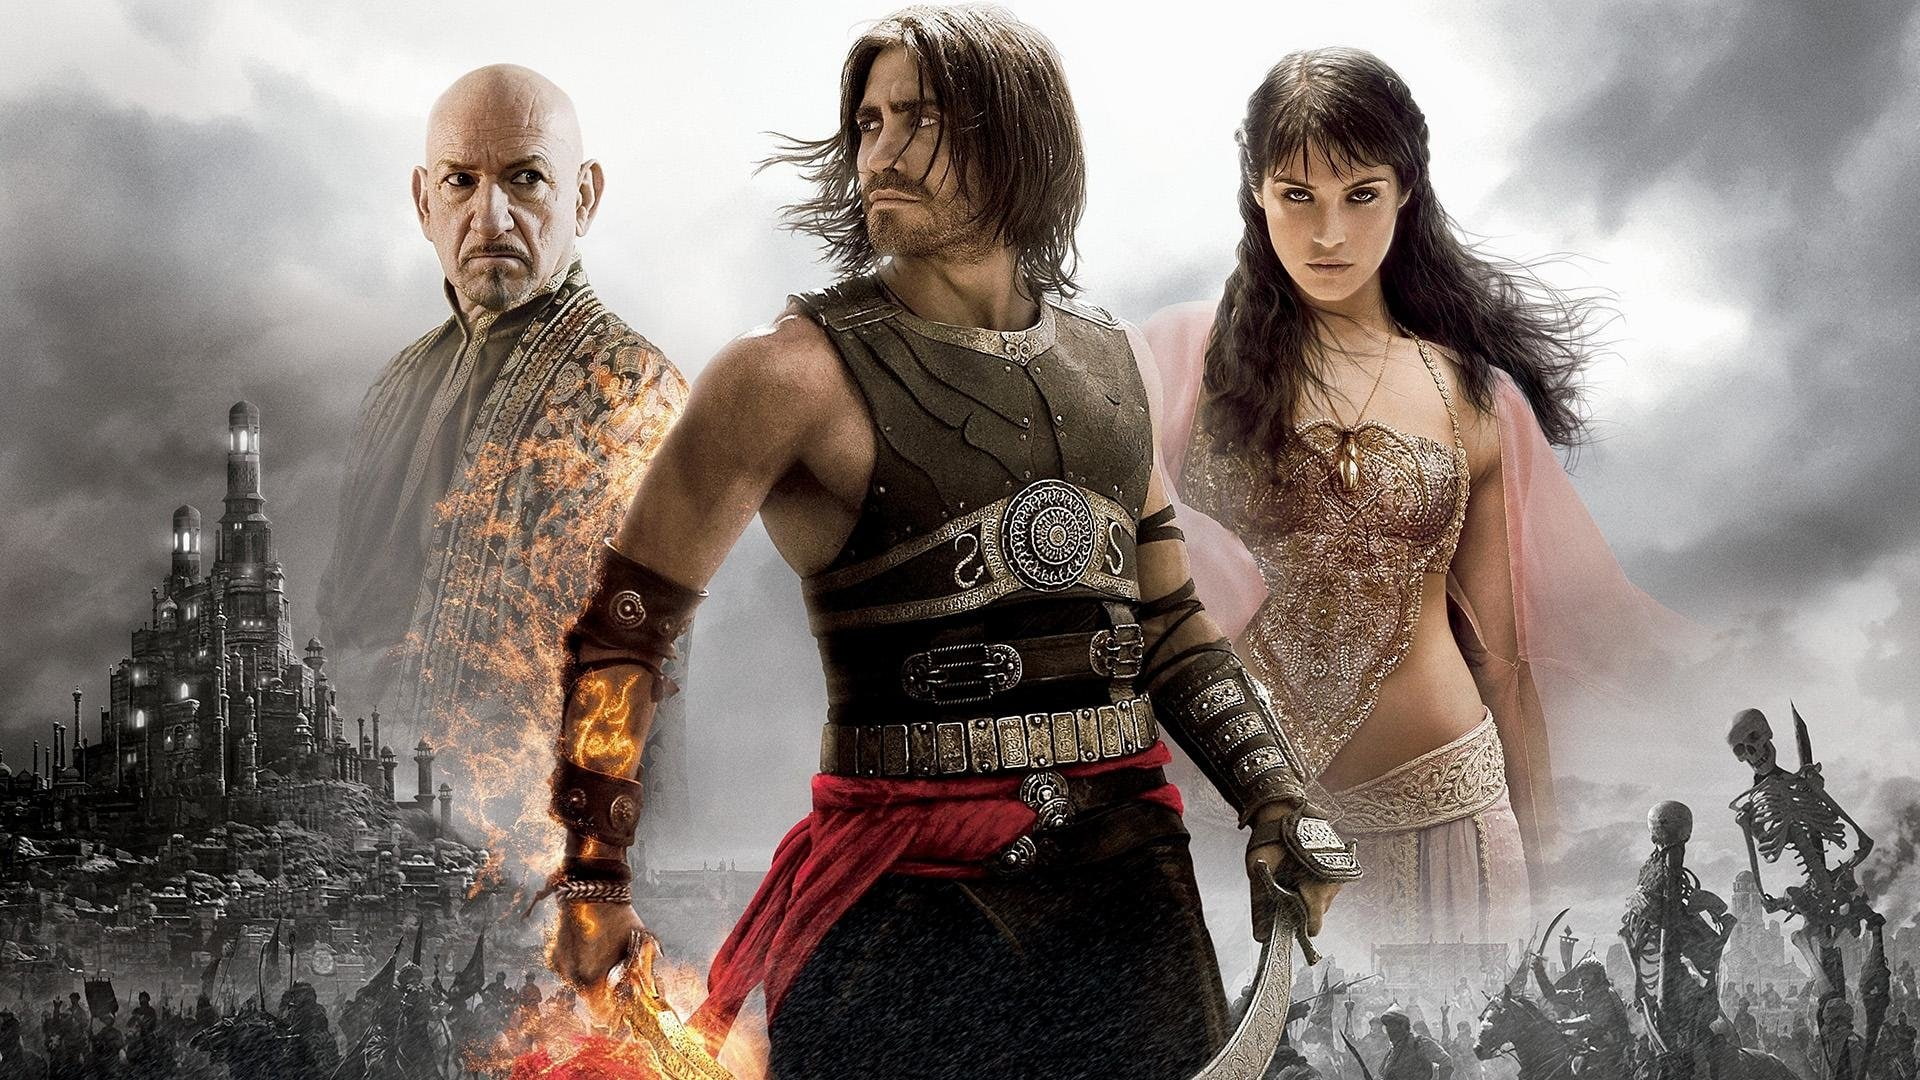 Prince of Persia, Prince of Persia: The Sands of Time, Prince Dastan